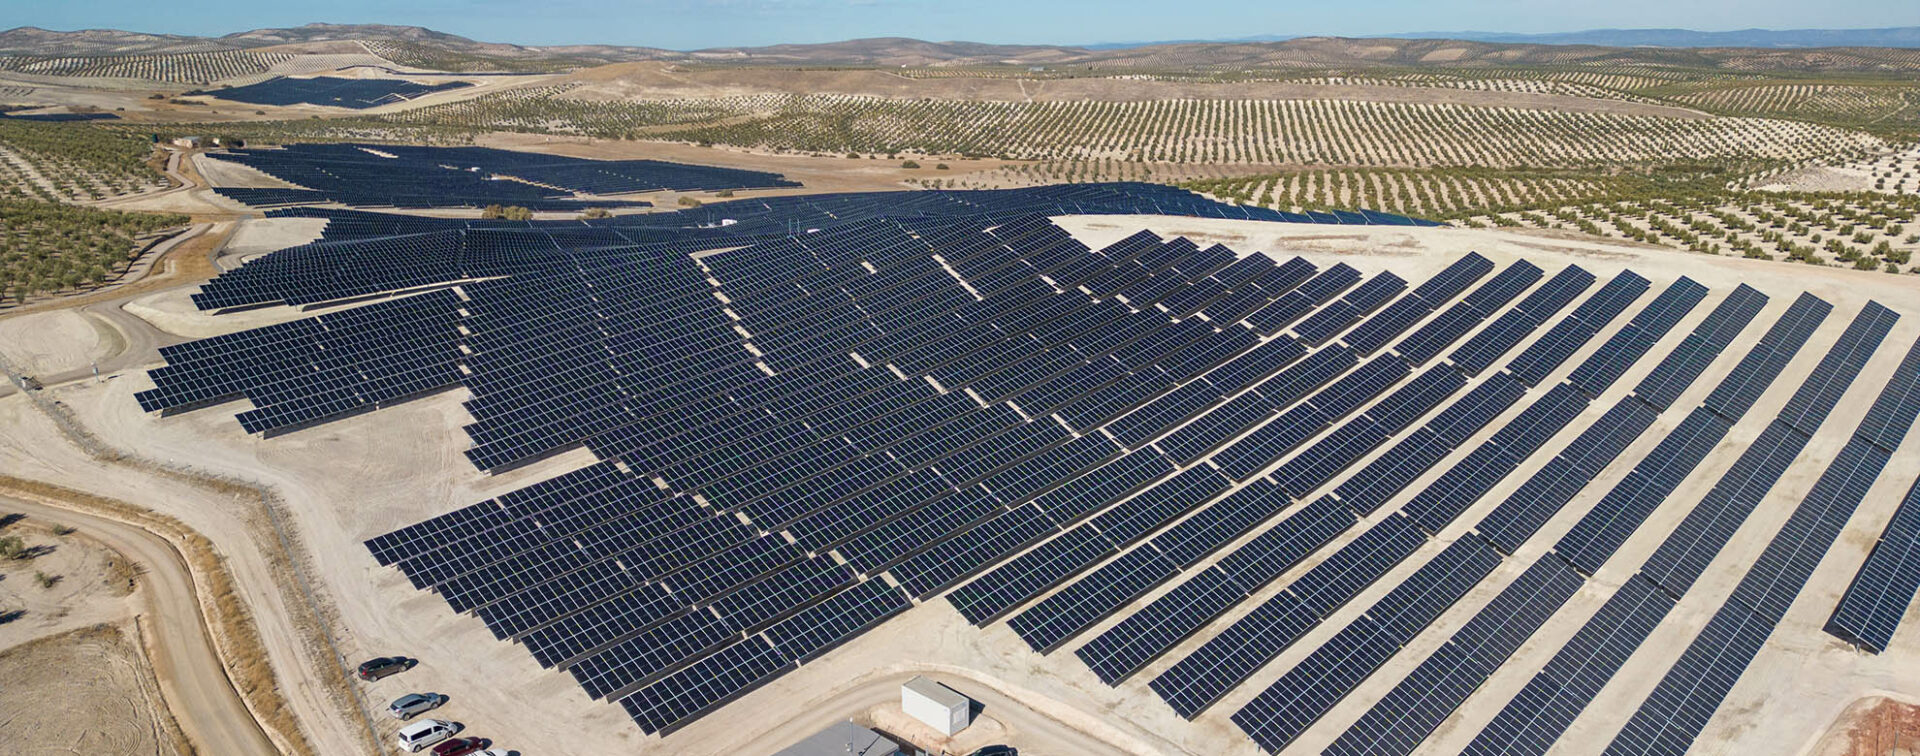 Airview of solar energy plant Jaen situated in a wide, dry area.